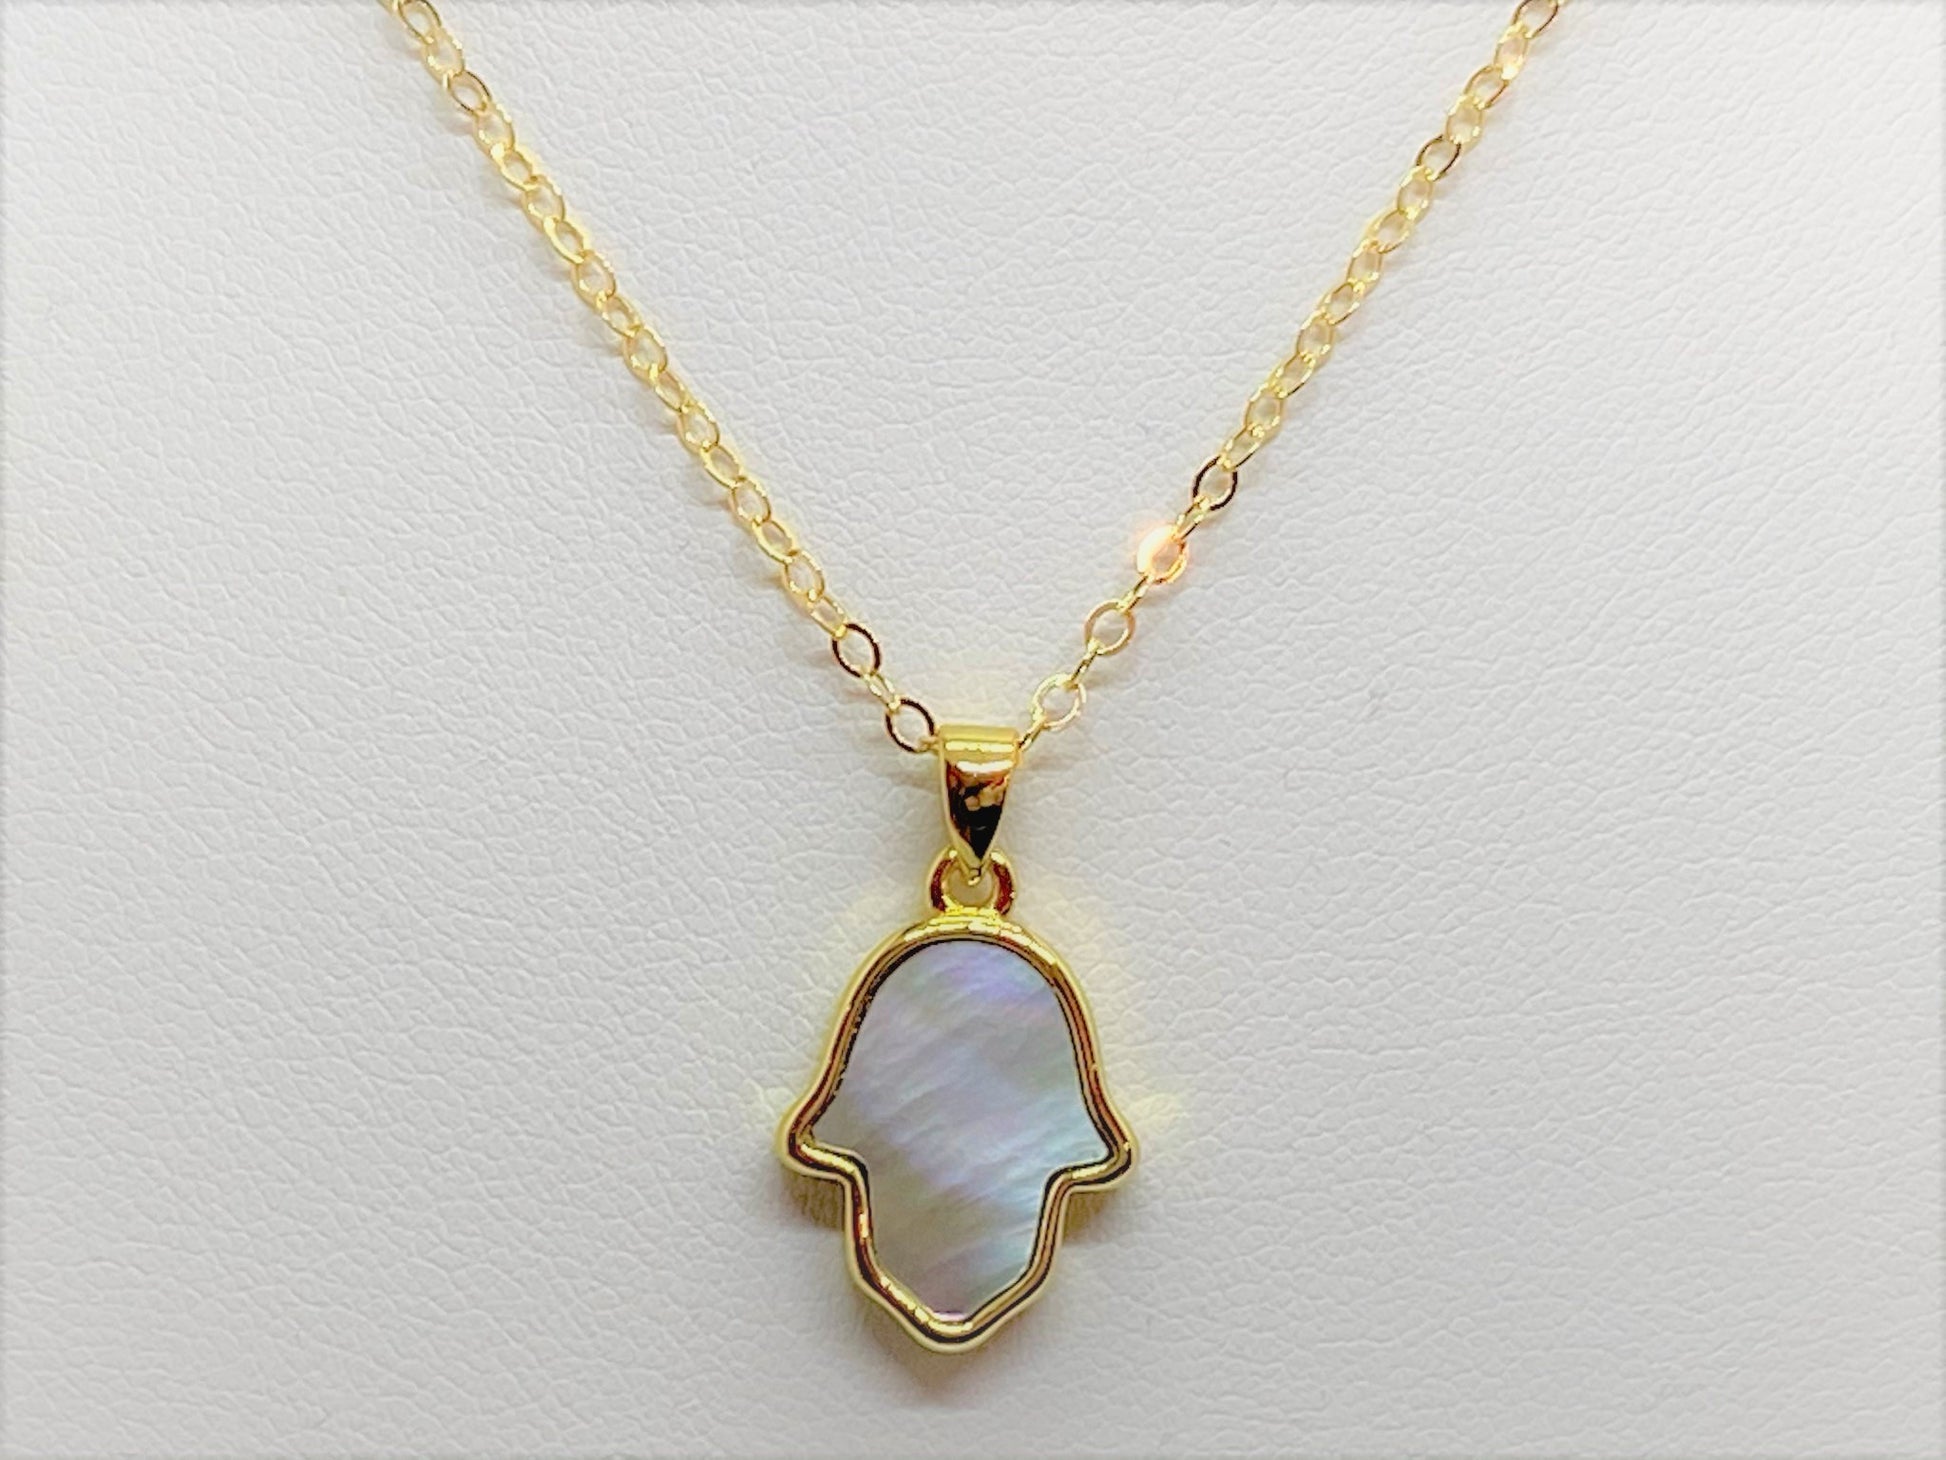 Gold Plated Abalone Hamsa on a Gold Filled Chain - Emmis Jewelry, Necklace, [product_color]